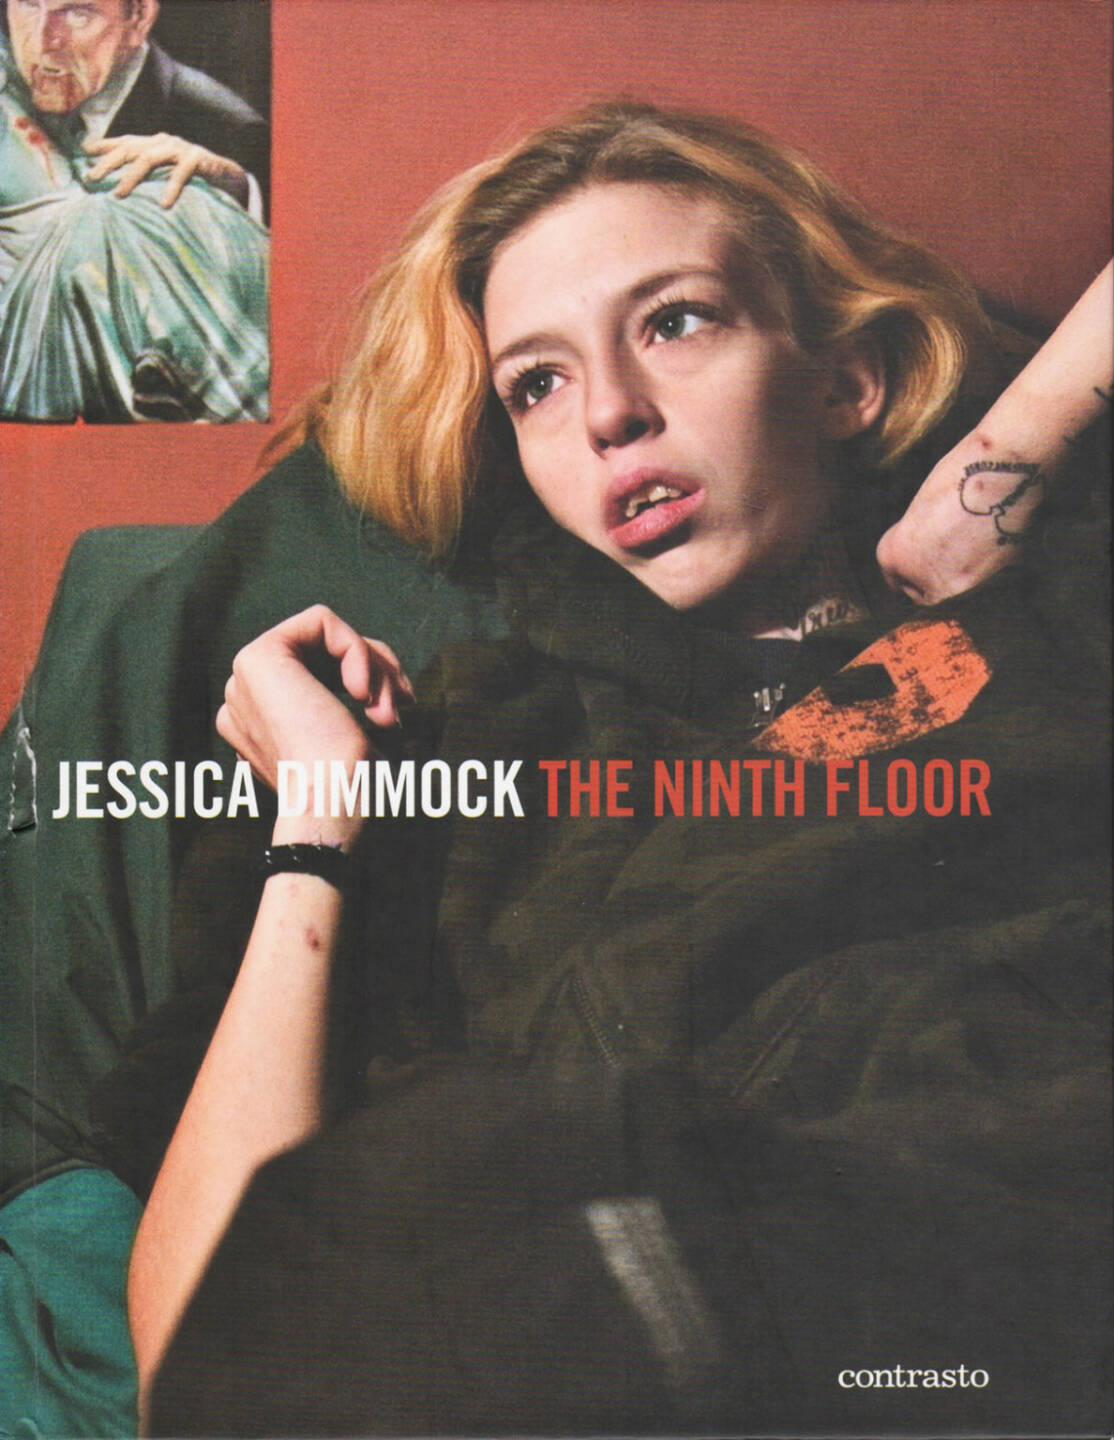 Jessica Dimmock - The Ninth Floor - 100-150 Euro, http://josefchladek.com/book/jessica_dimmock_-_the_ninth_floor